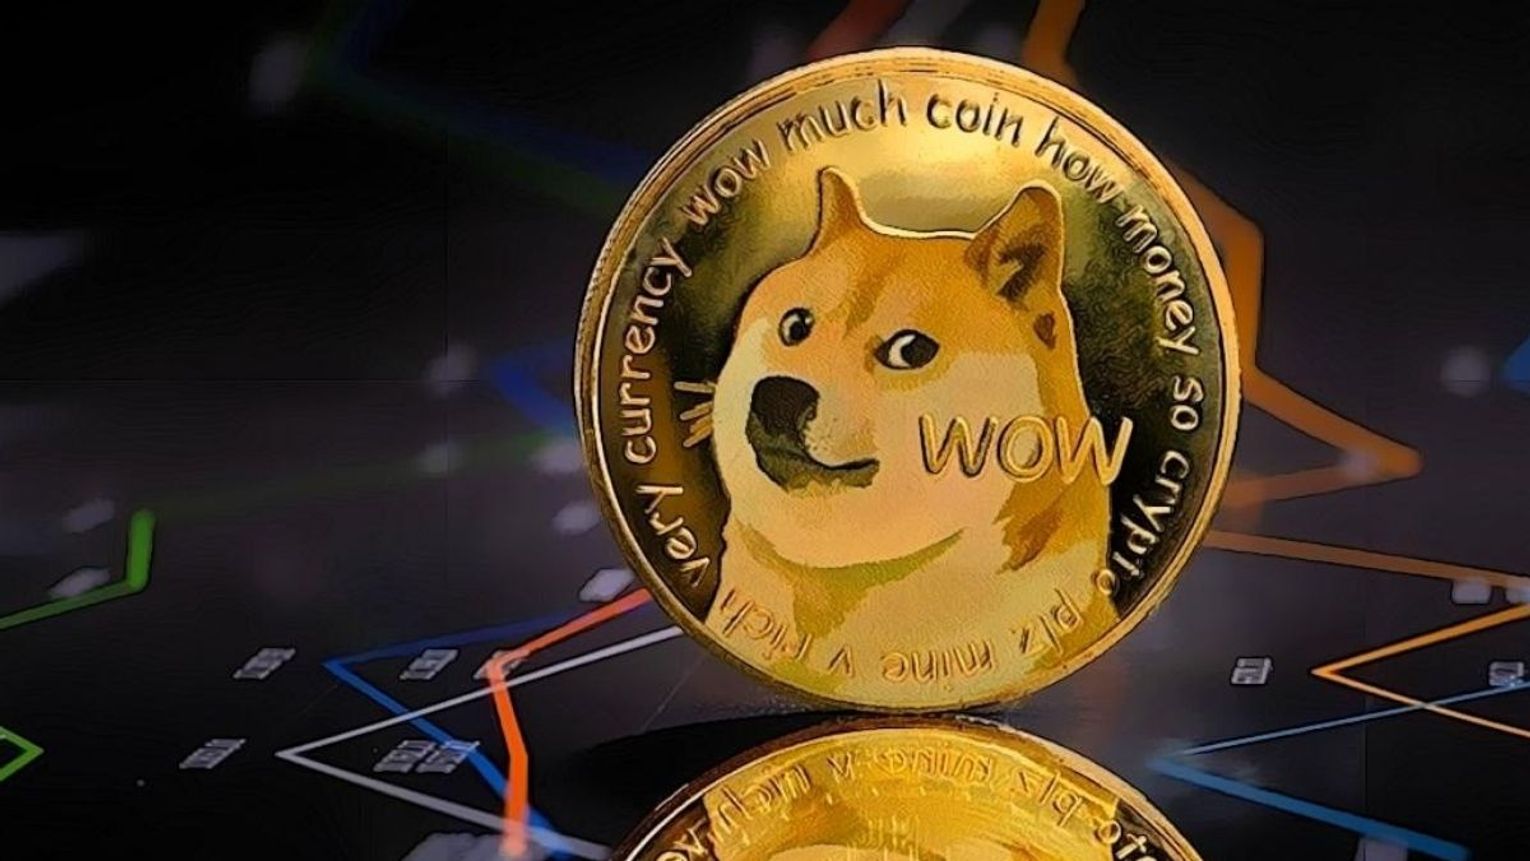 How To Buy Dogecoin (DOGE)